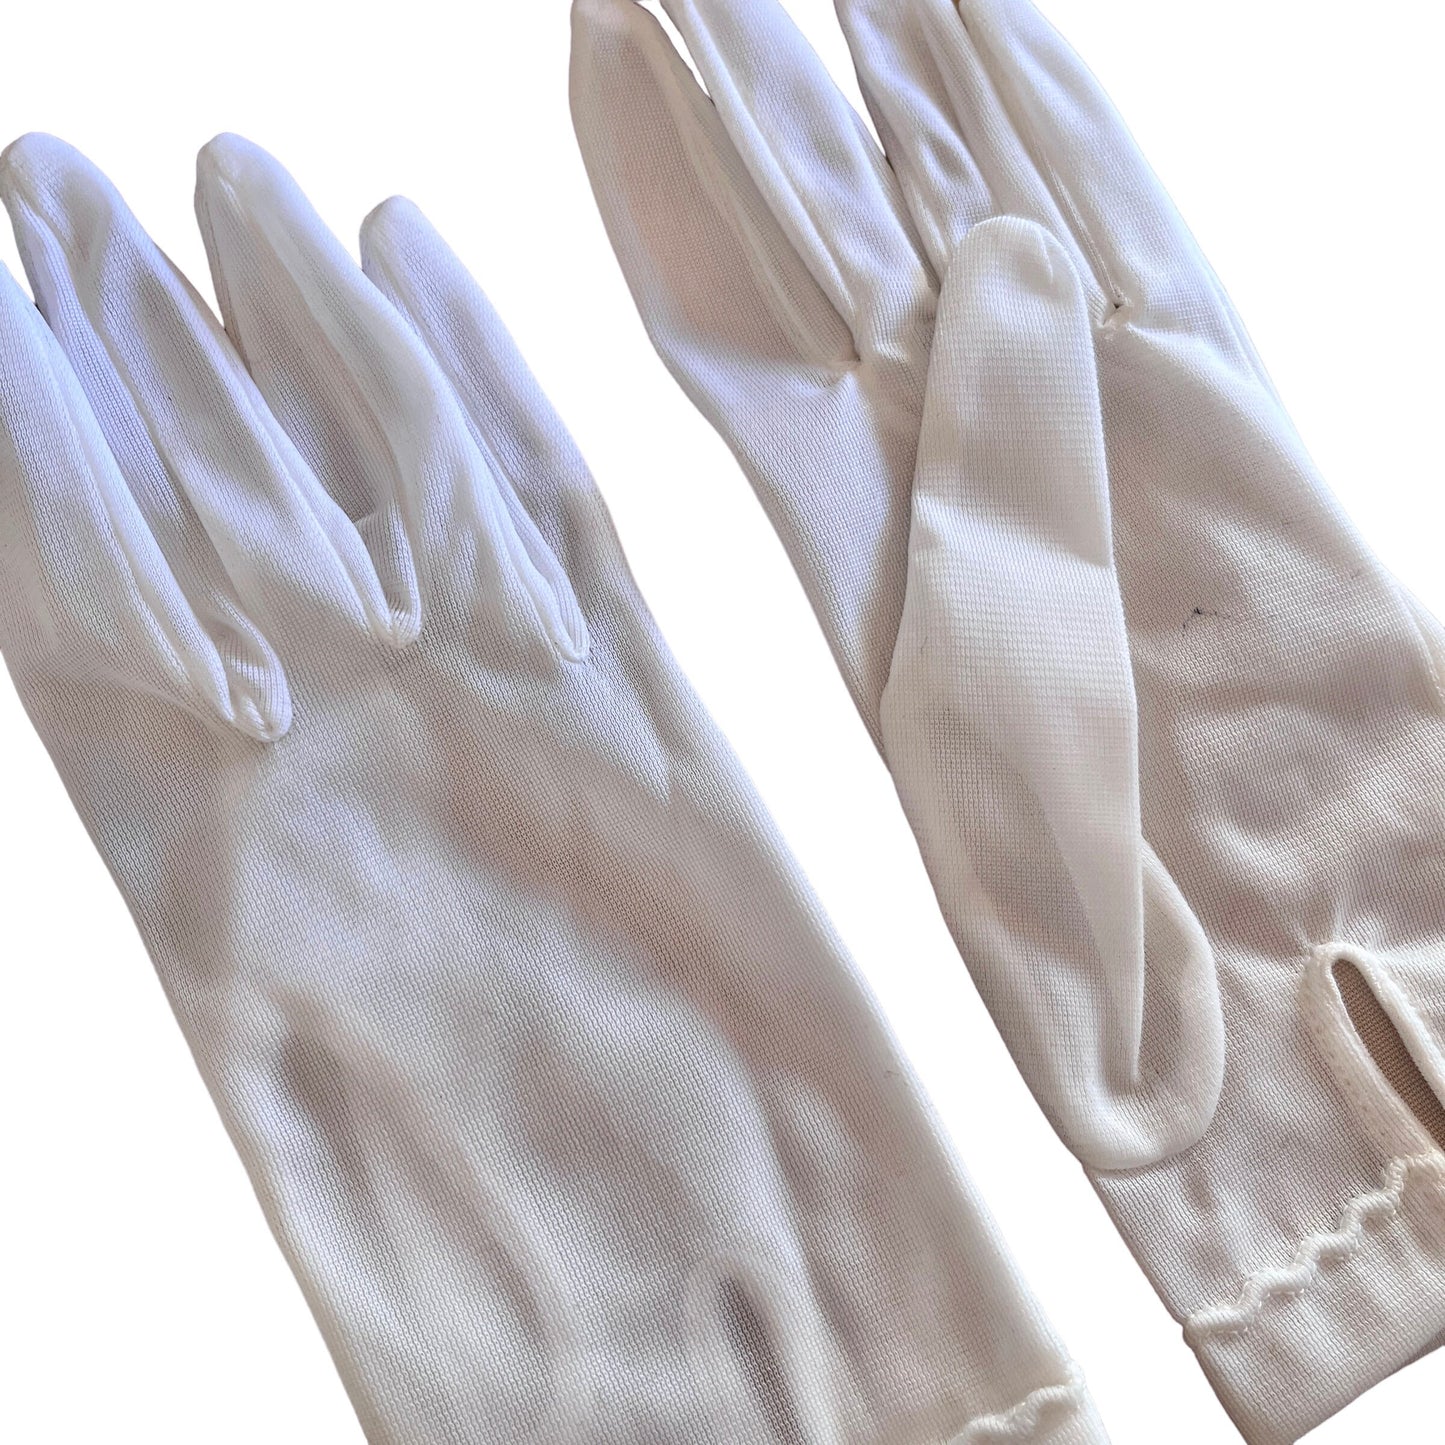 Vintage White 60s Formal Gloves from 3-5Y